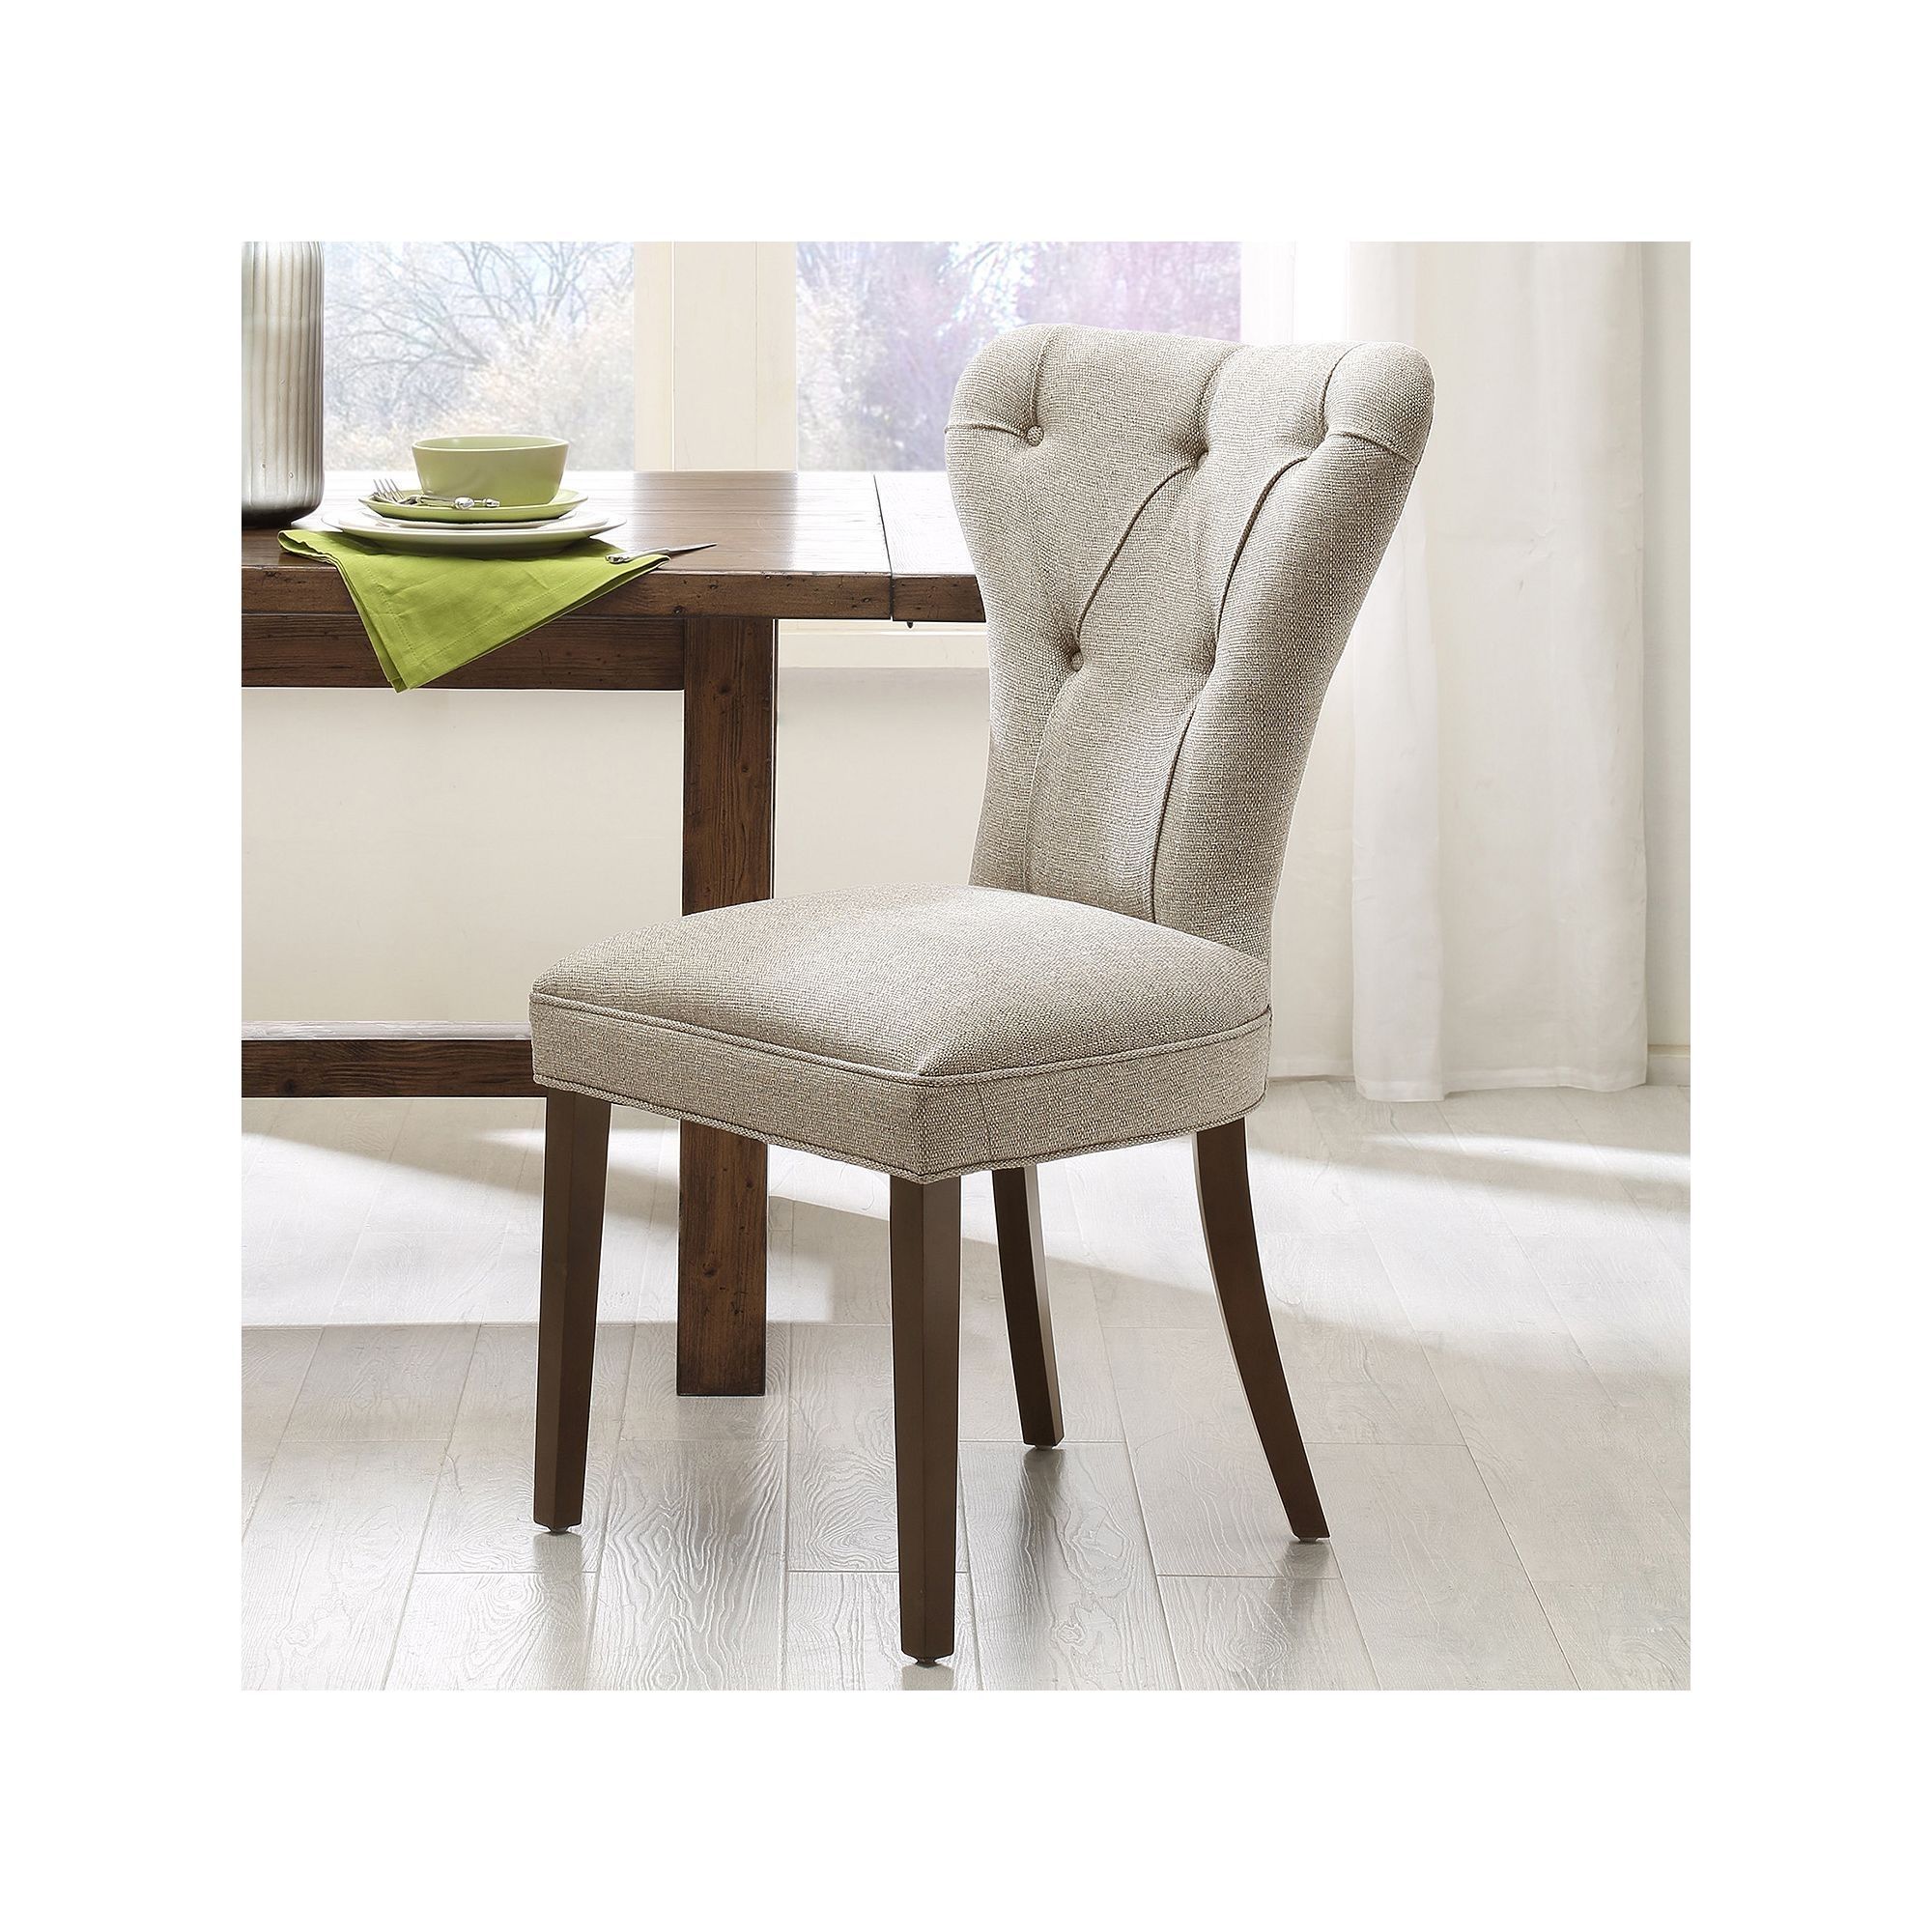 Caden Side Chairs Inside Fashionable Madison Park 2 Piece Jocelyn Dining Chair Set, Beig/green (beig (Photo 13 of 20)